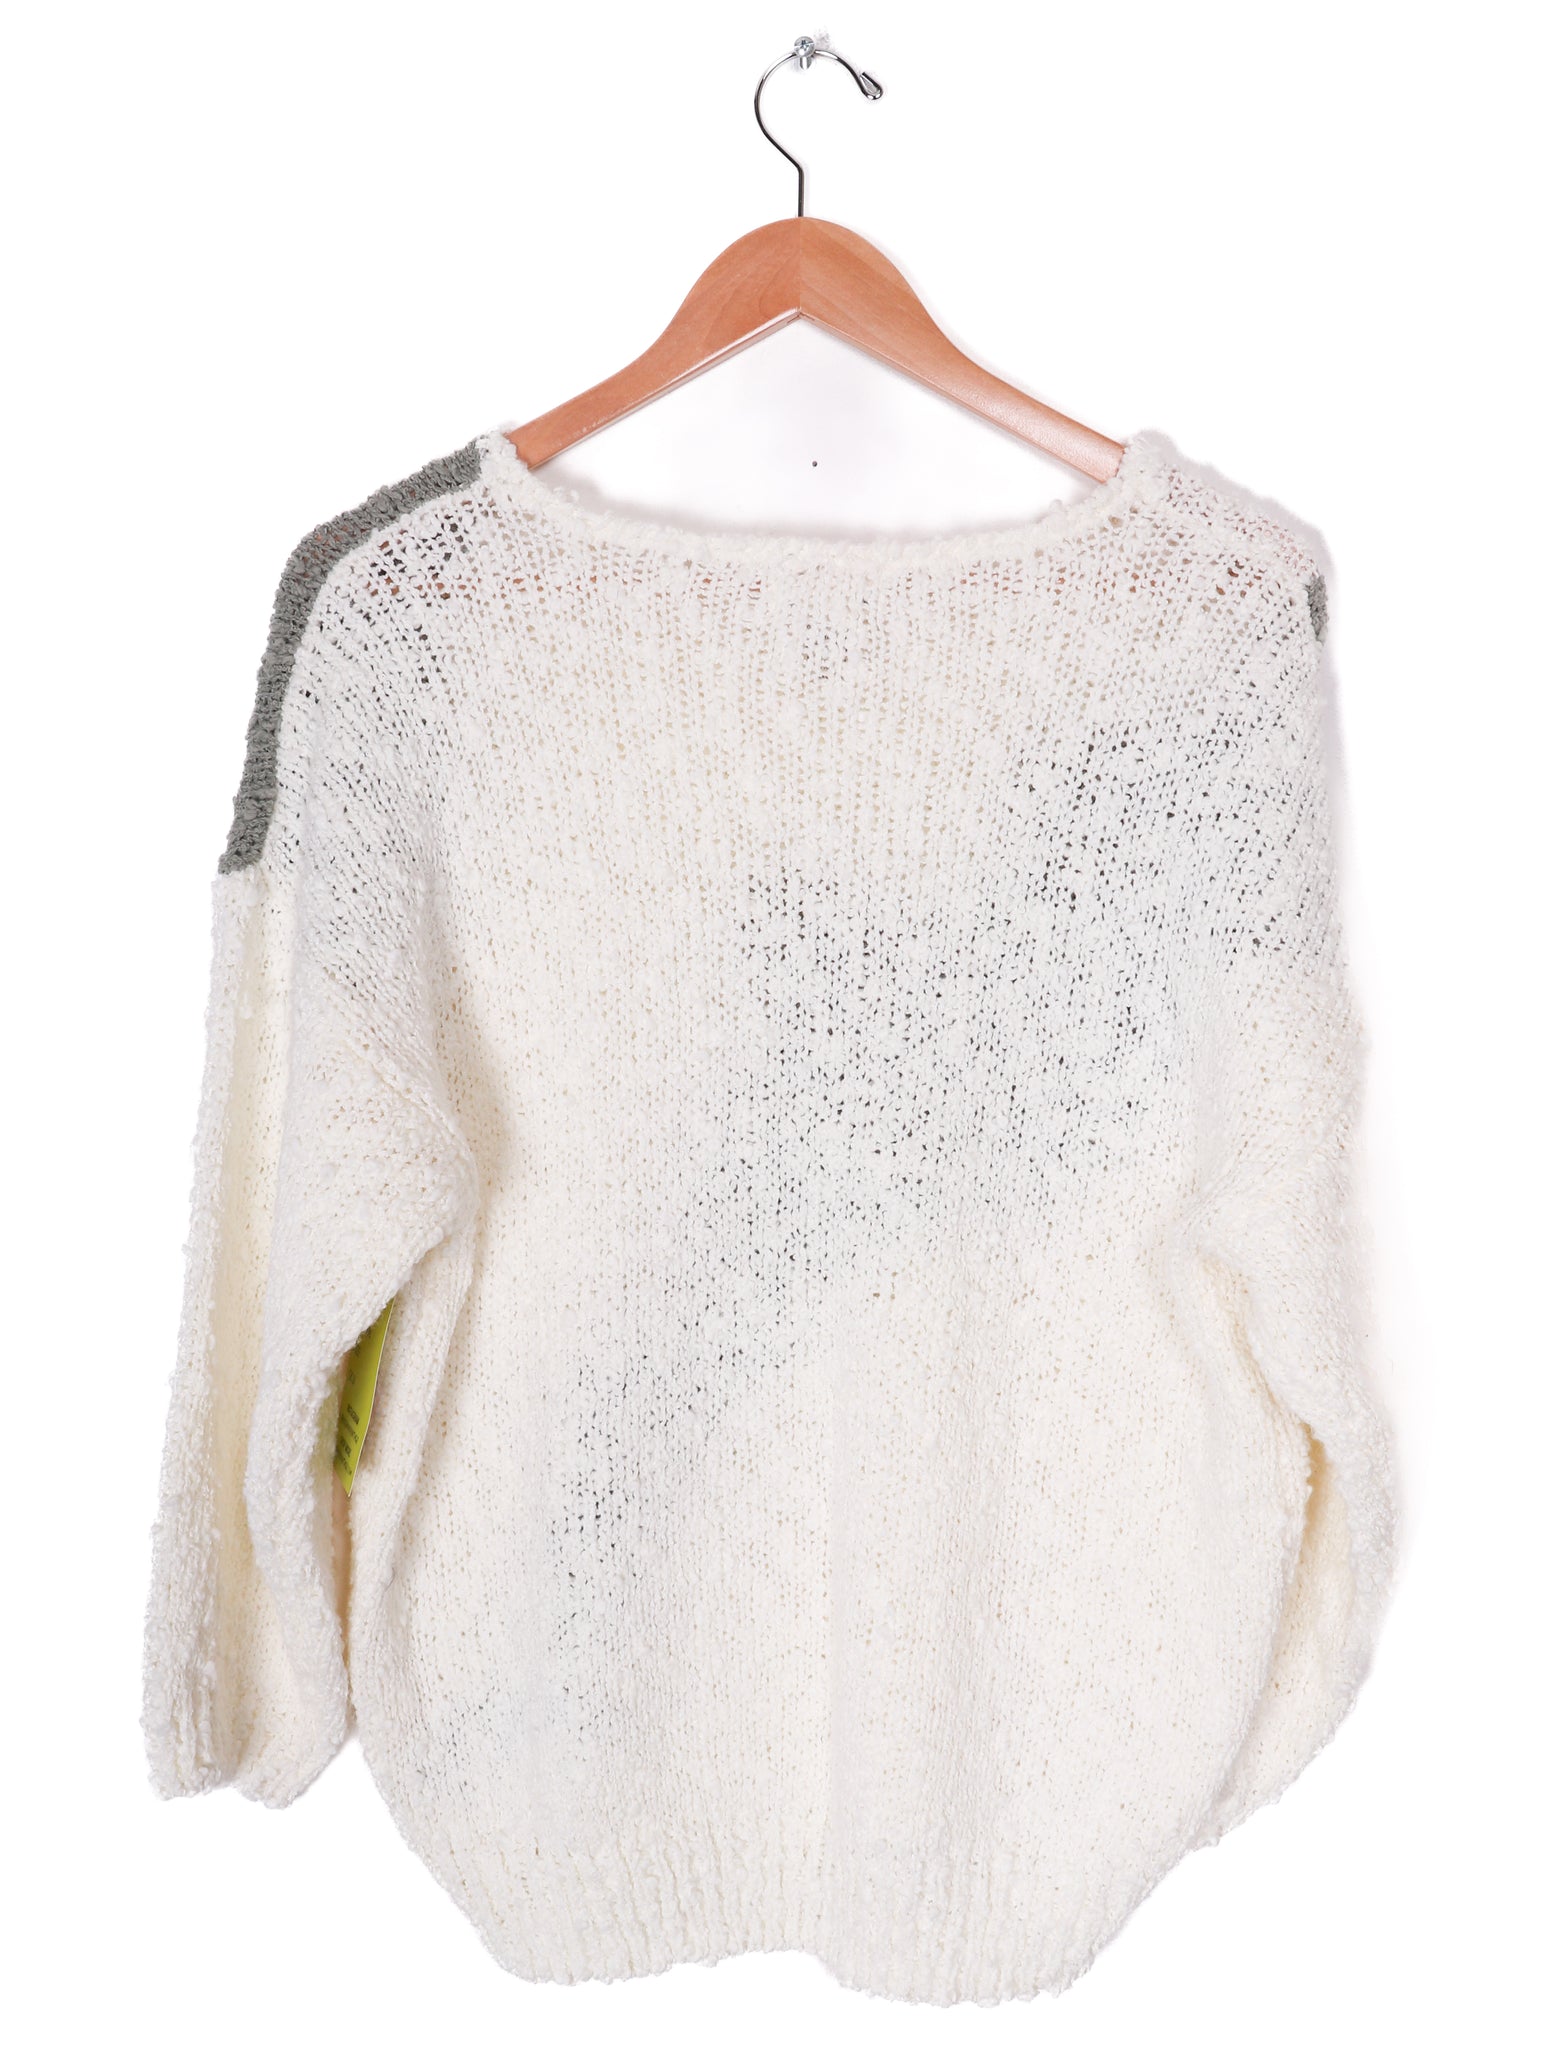 90s Hana Lee White Floral Knit Sweater